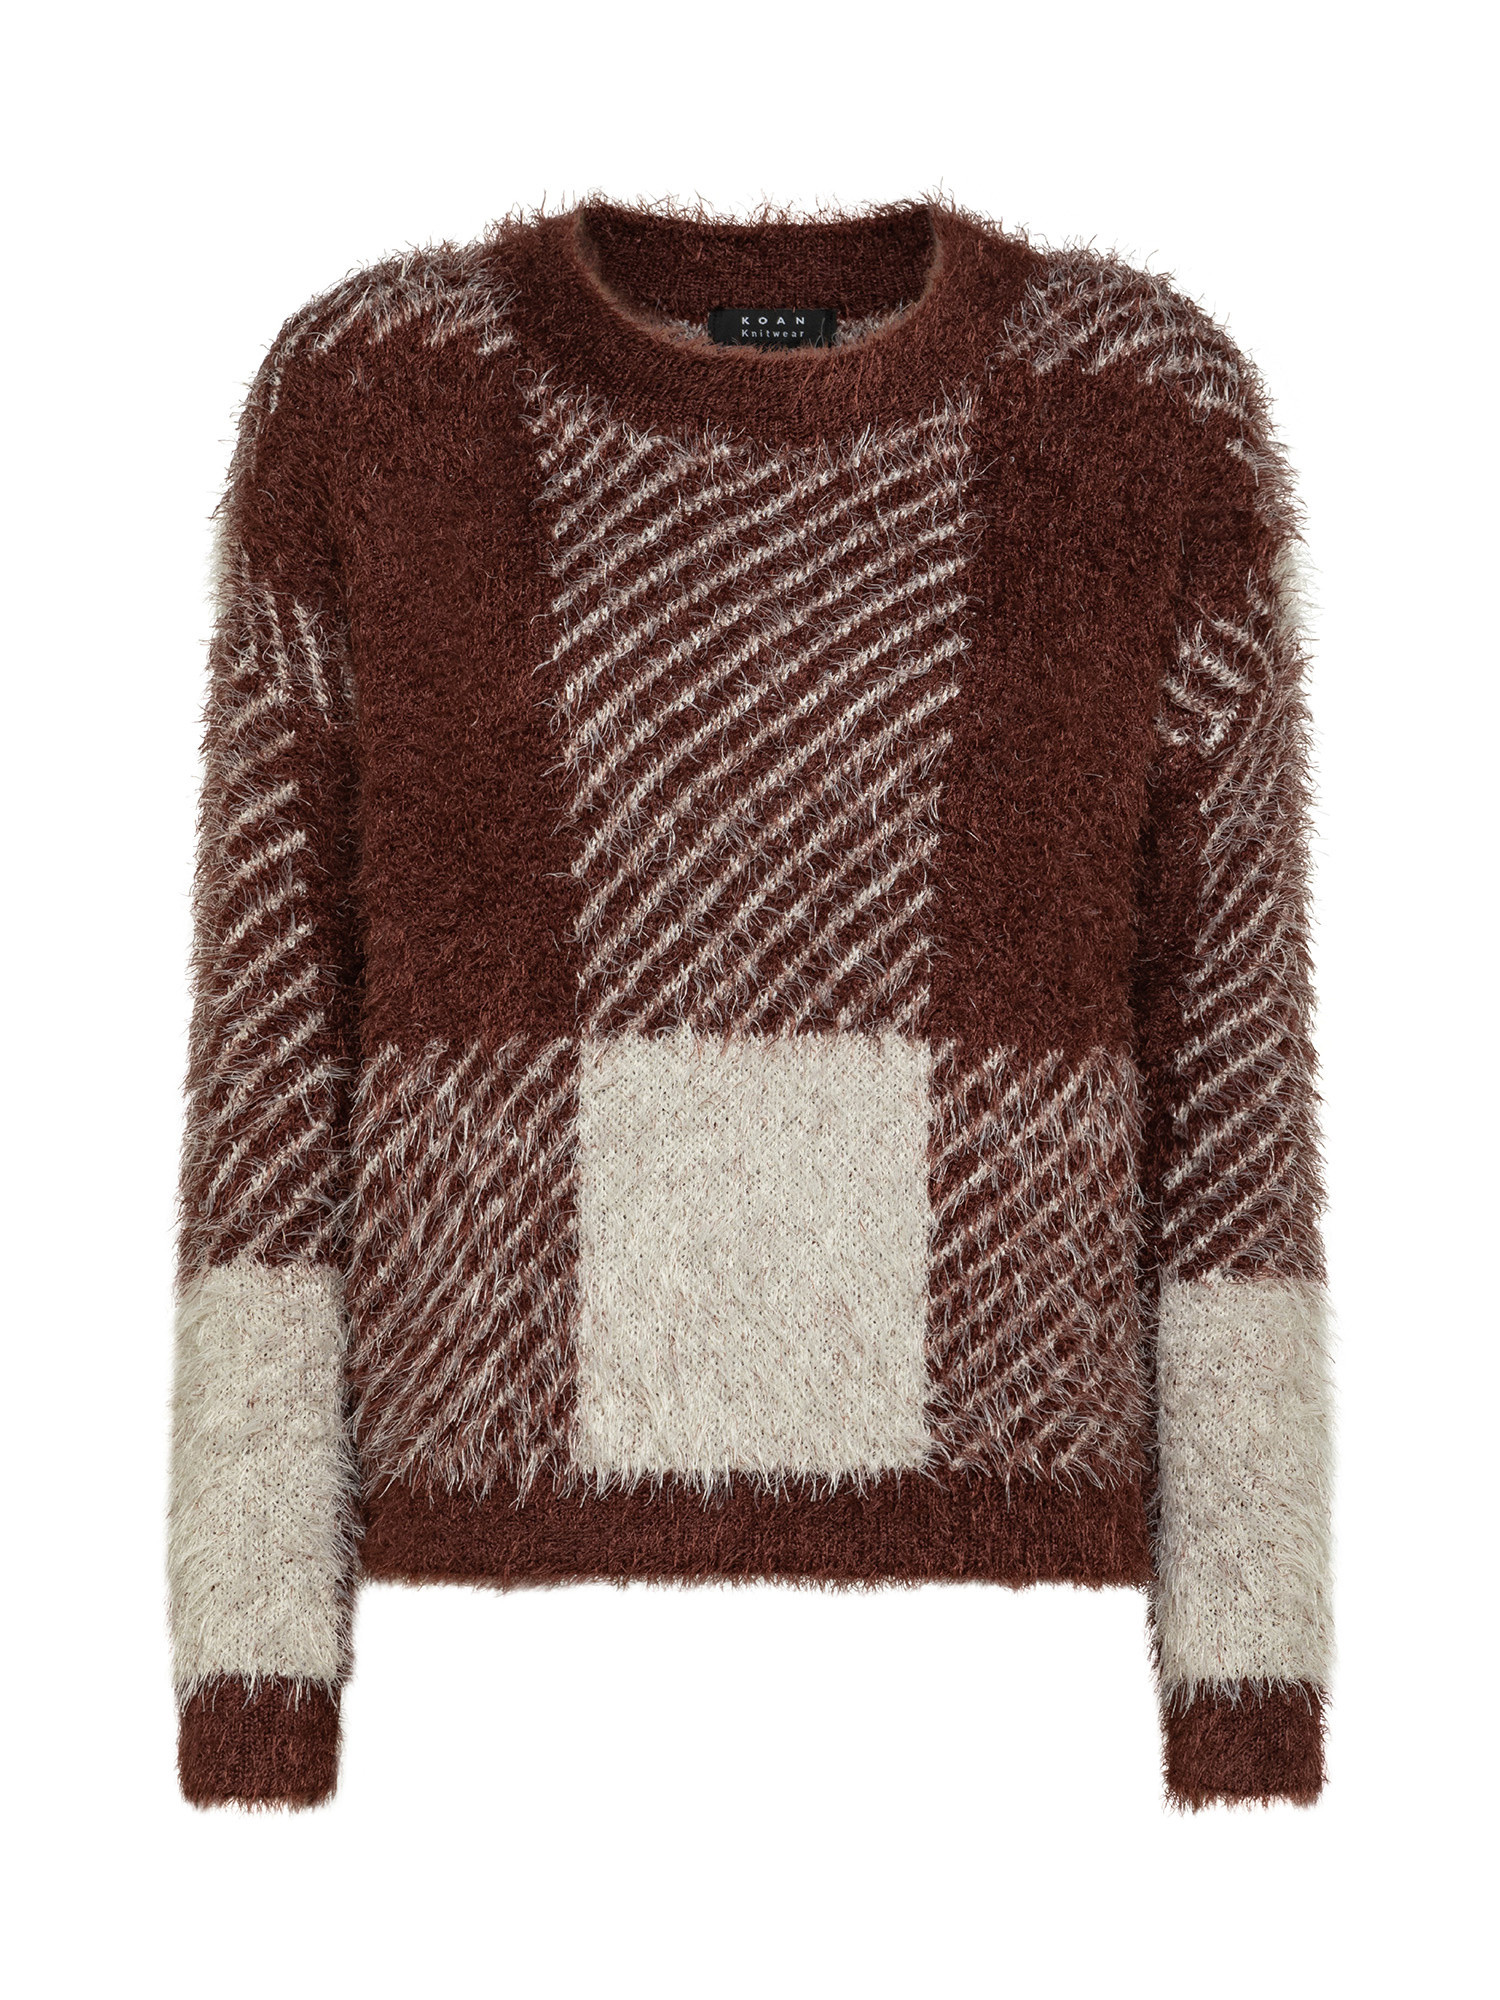 Koan - Checked crewneck pullover, Brown, large image number 0